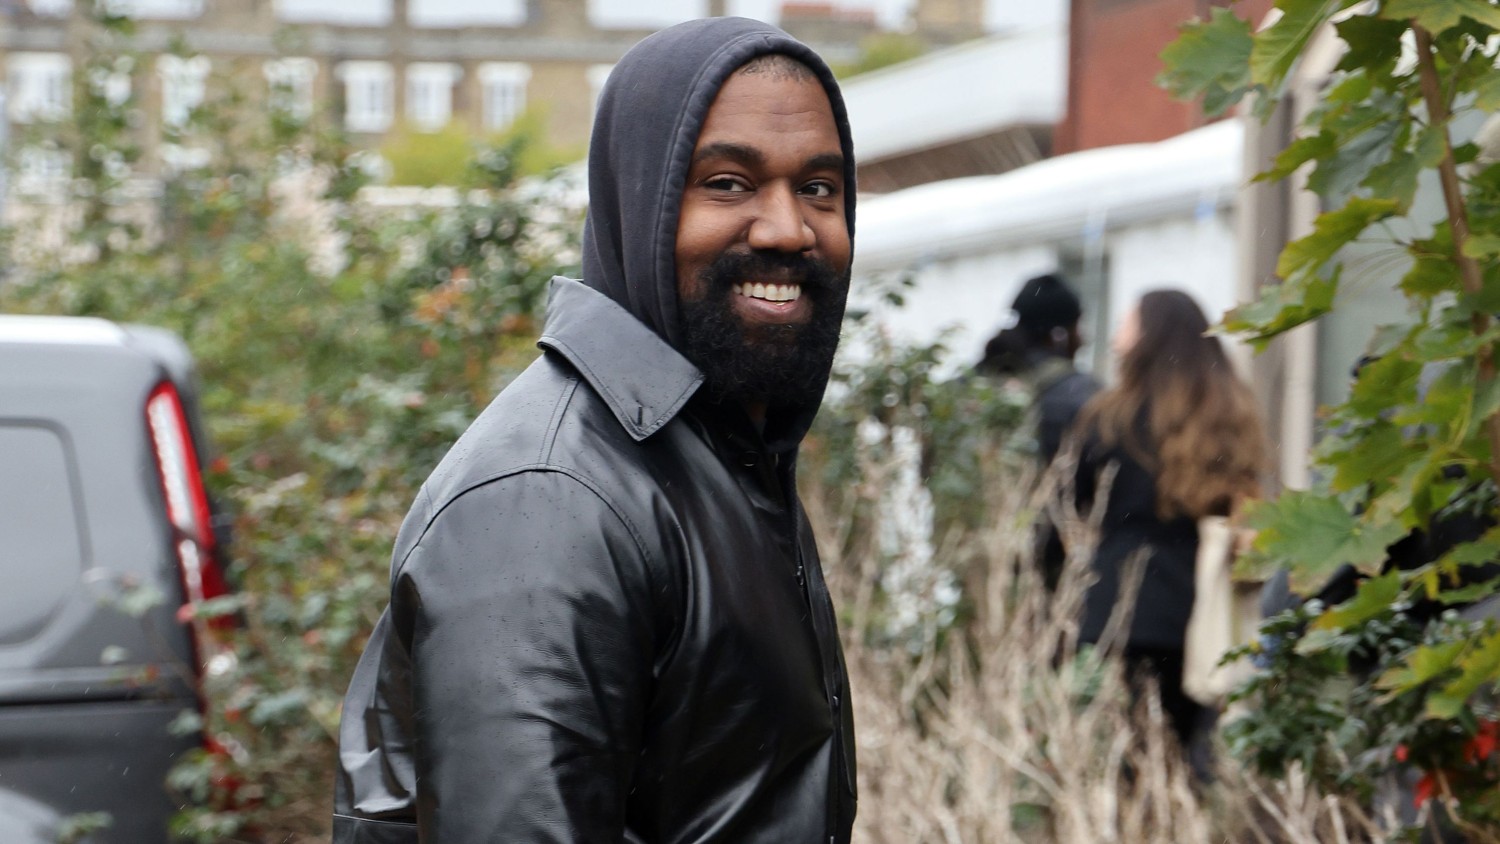 Neil Mockford/GC Images/Getty Images / Kanye West is seen during London Fashion Week on September 26.